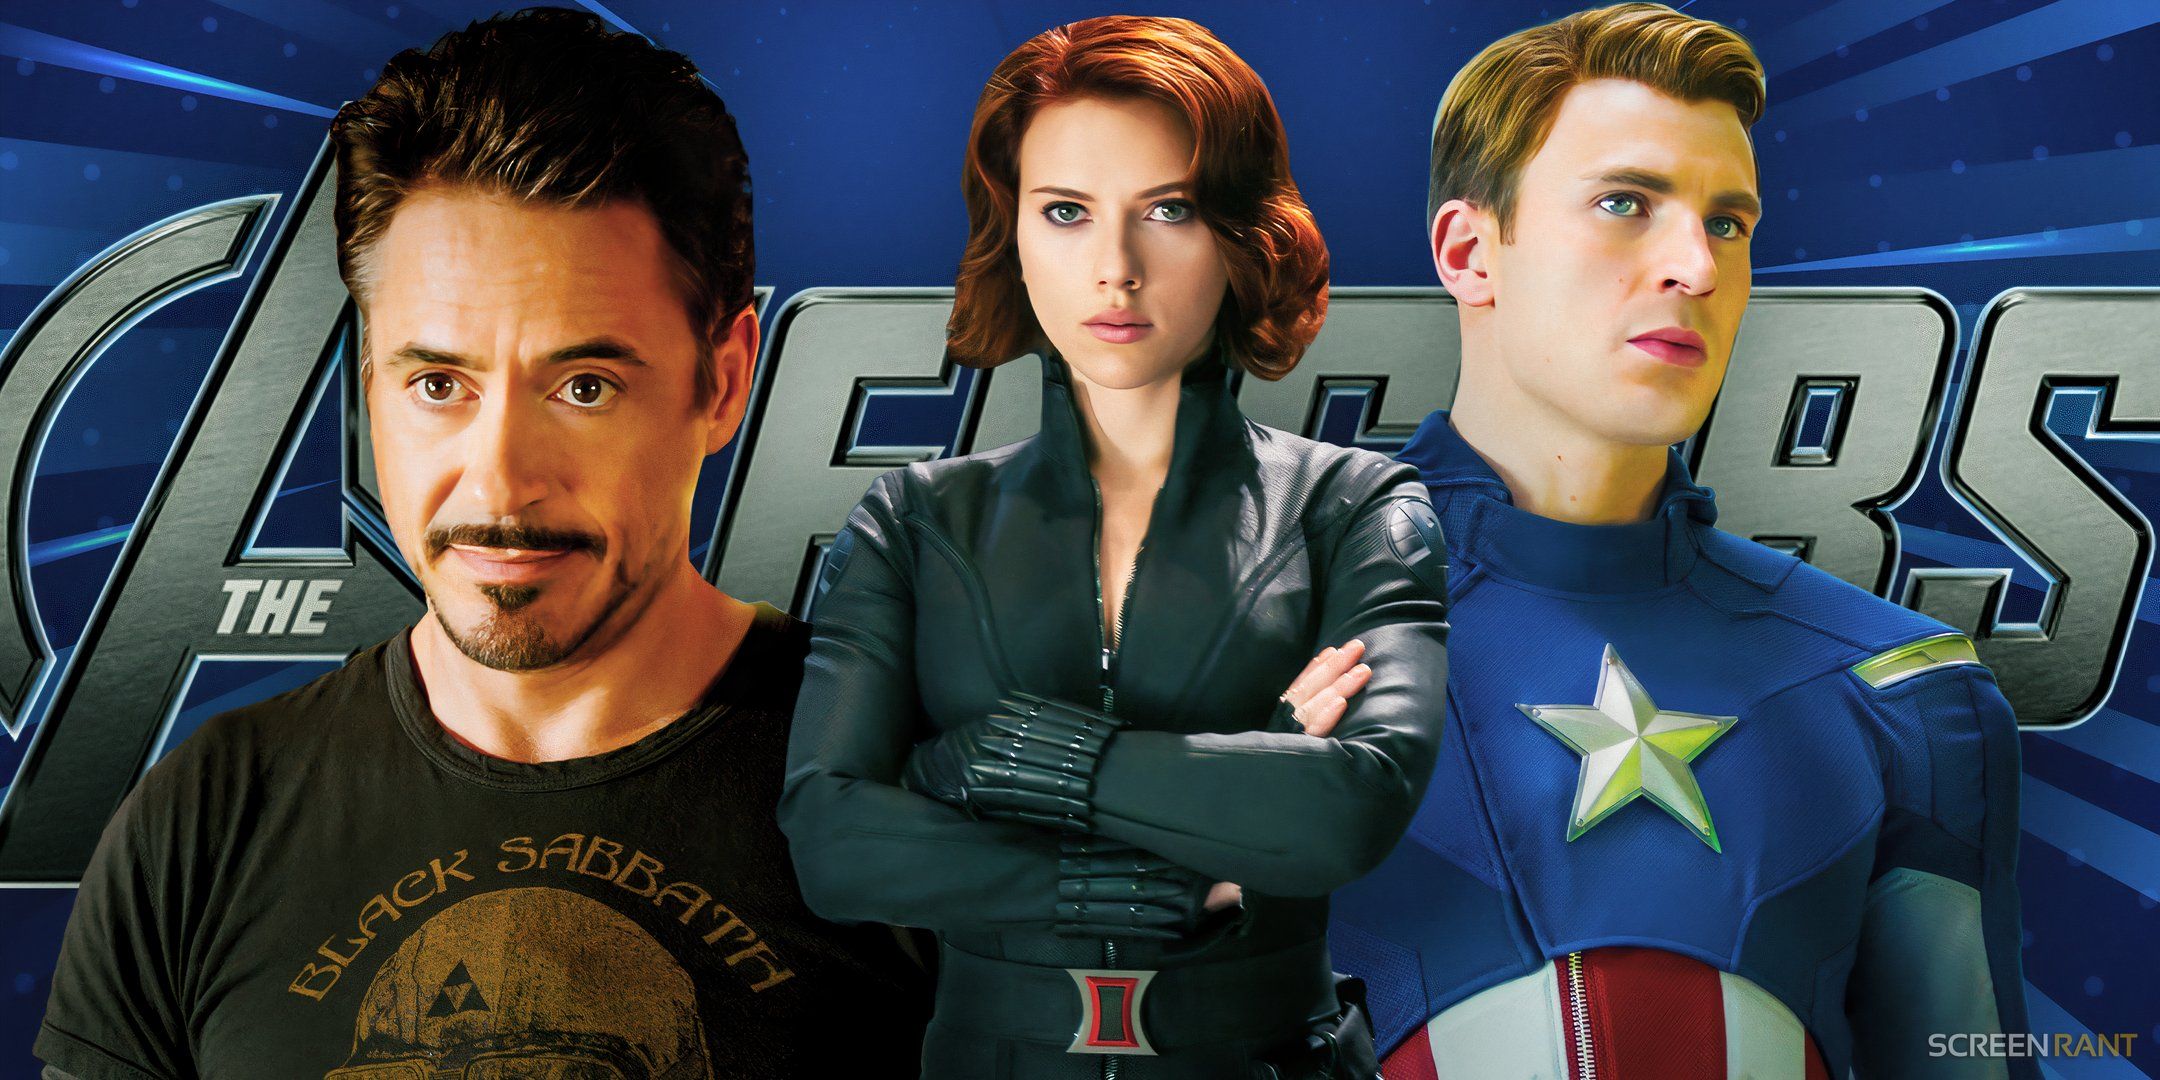 Robert Downey Jr. as Iron Man, Scarlett Johansson as Black Widow, and Chris Evans as Captain America in front of The Avengers (2012) logo